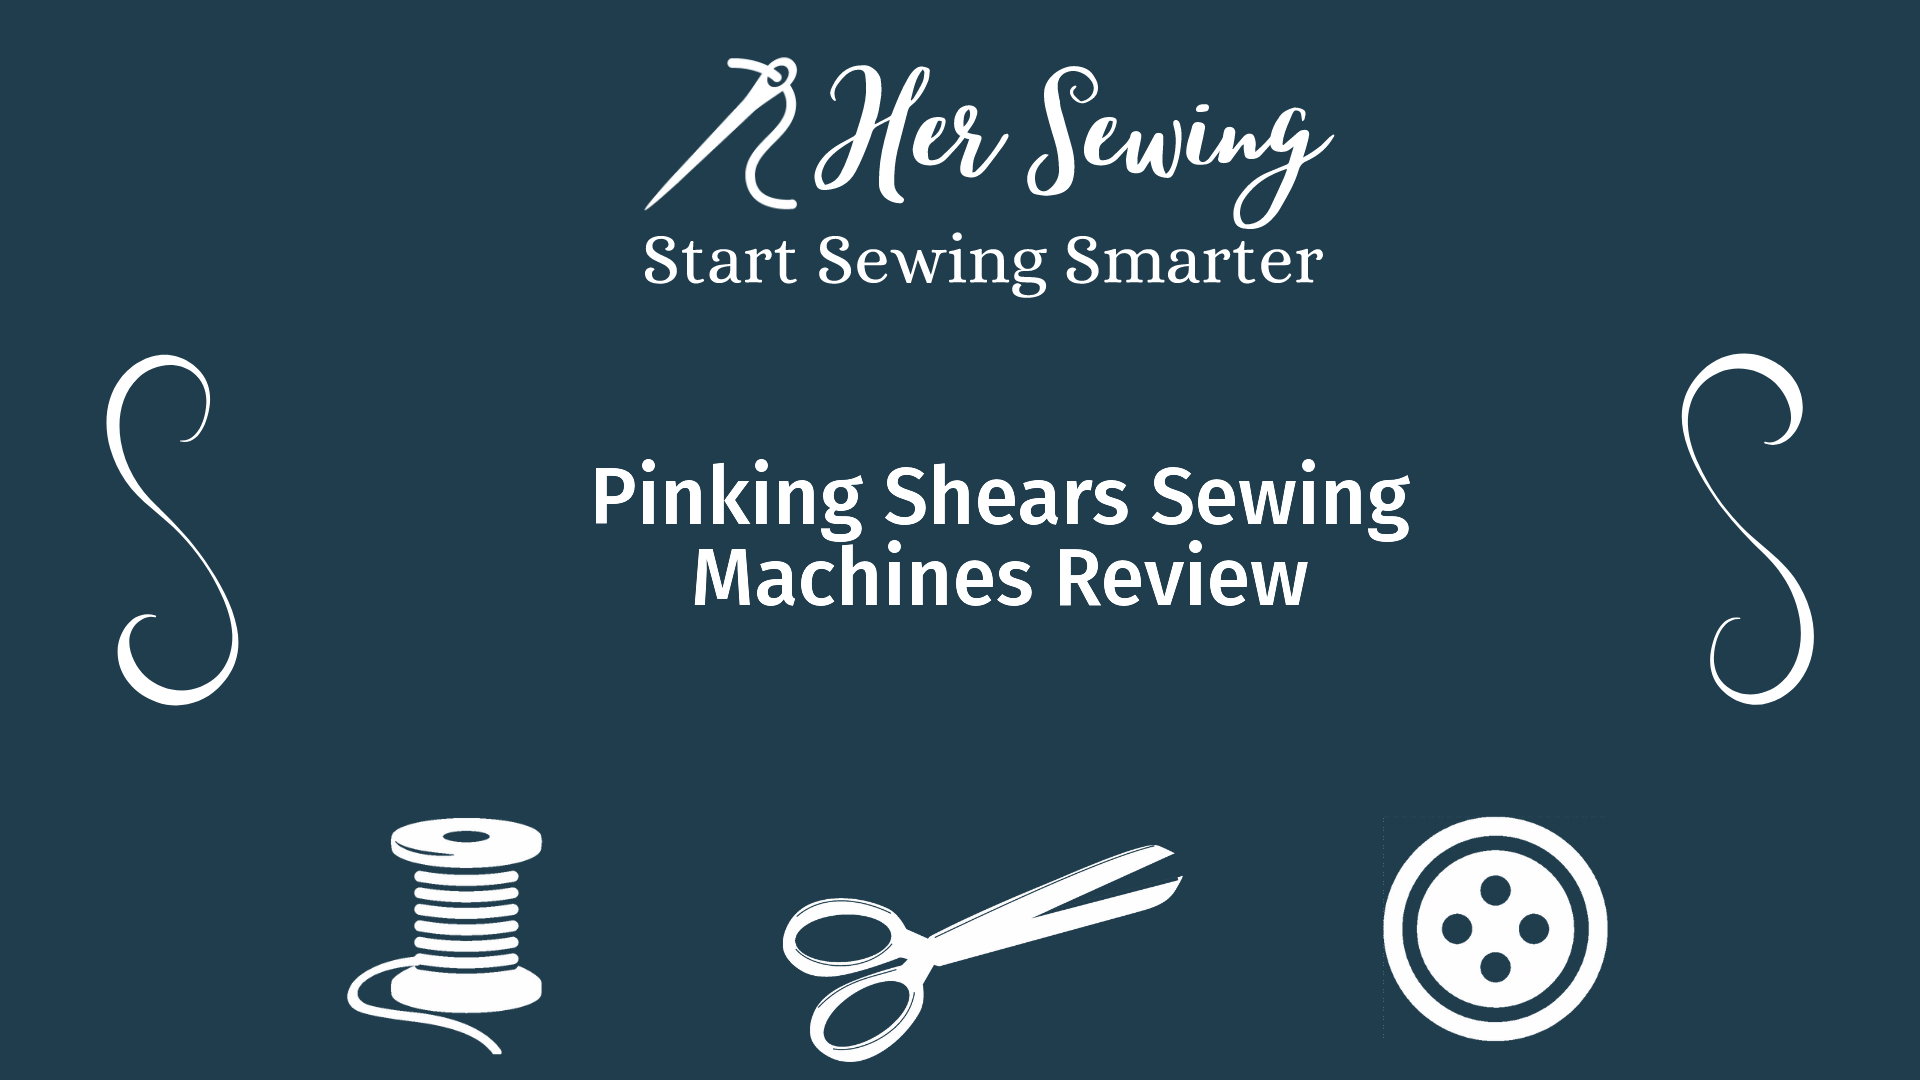 Pinking Shears Sewing Machines Review